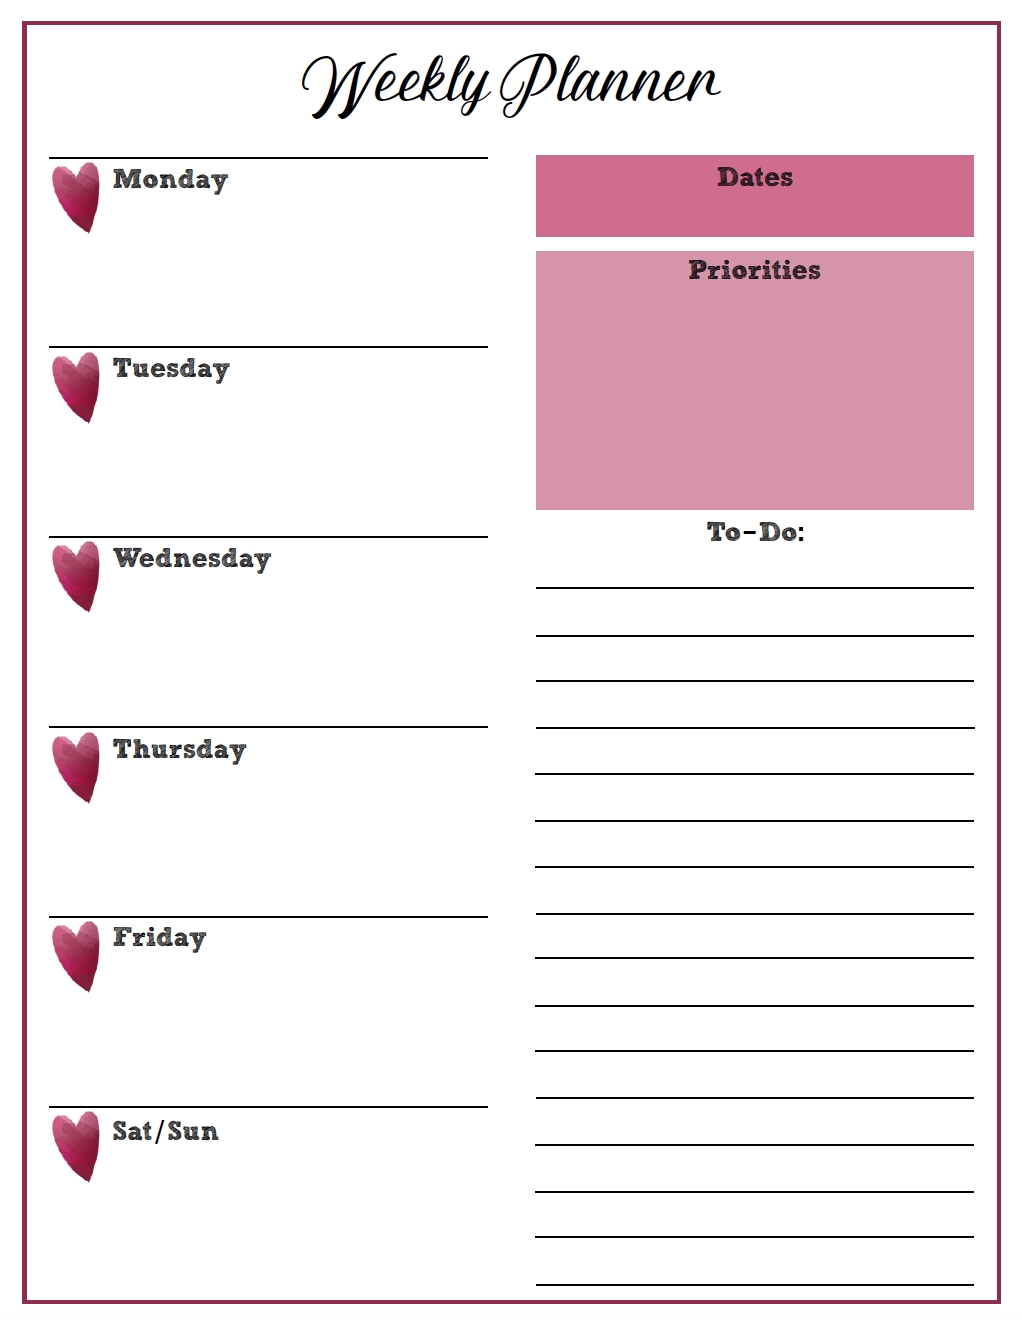 Free Printable Weekly Planners: Monday Start